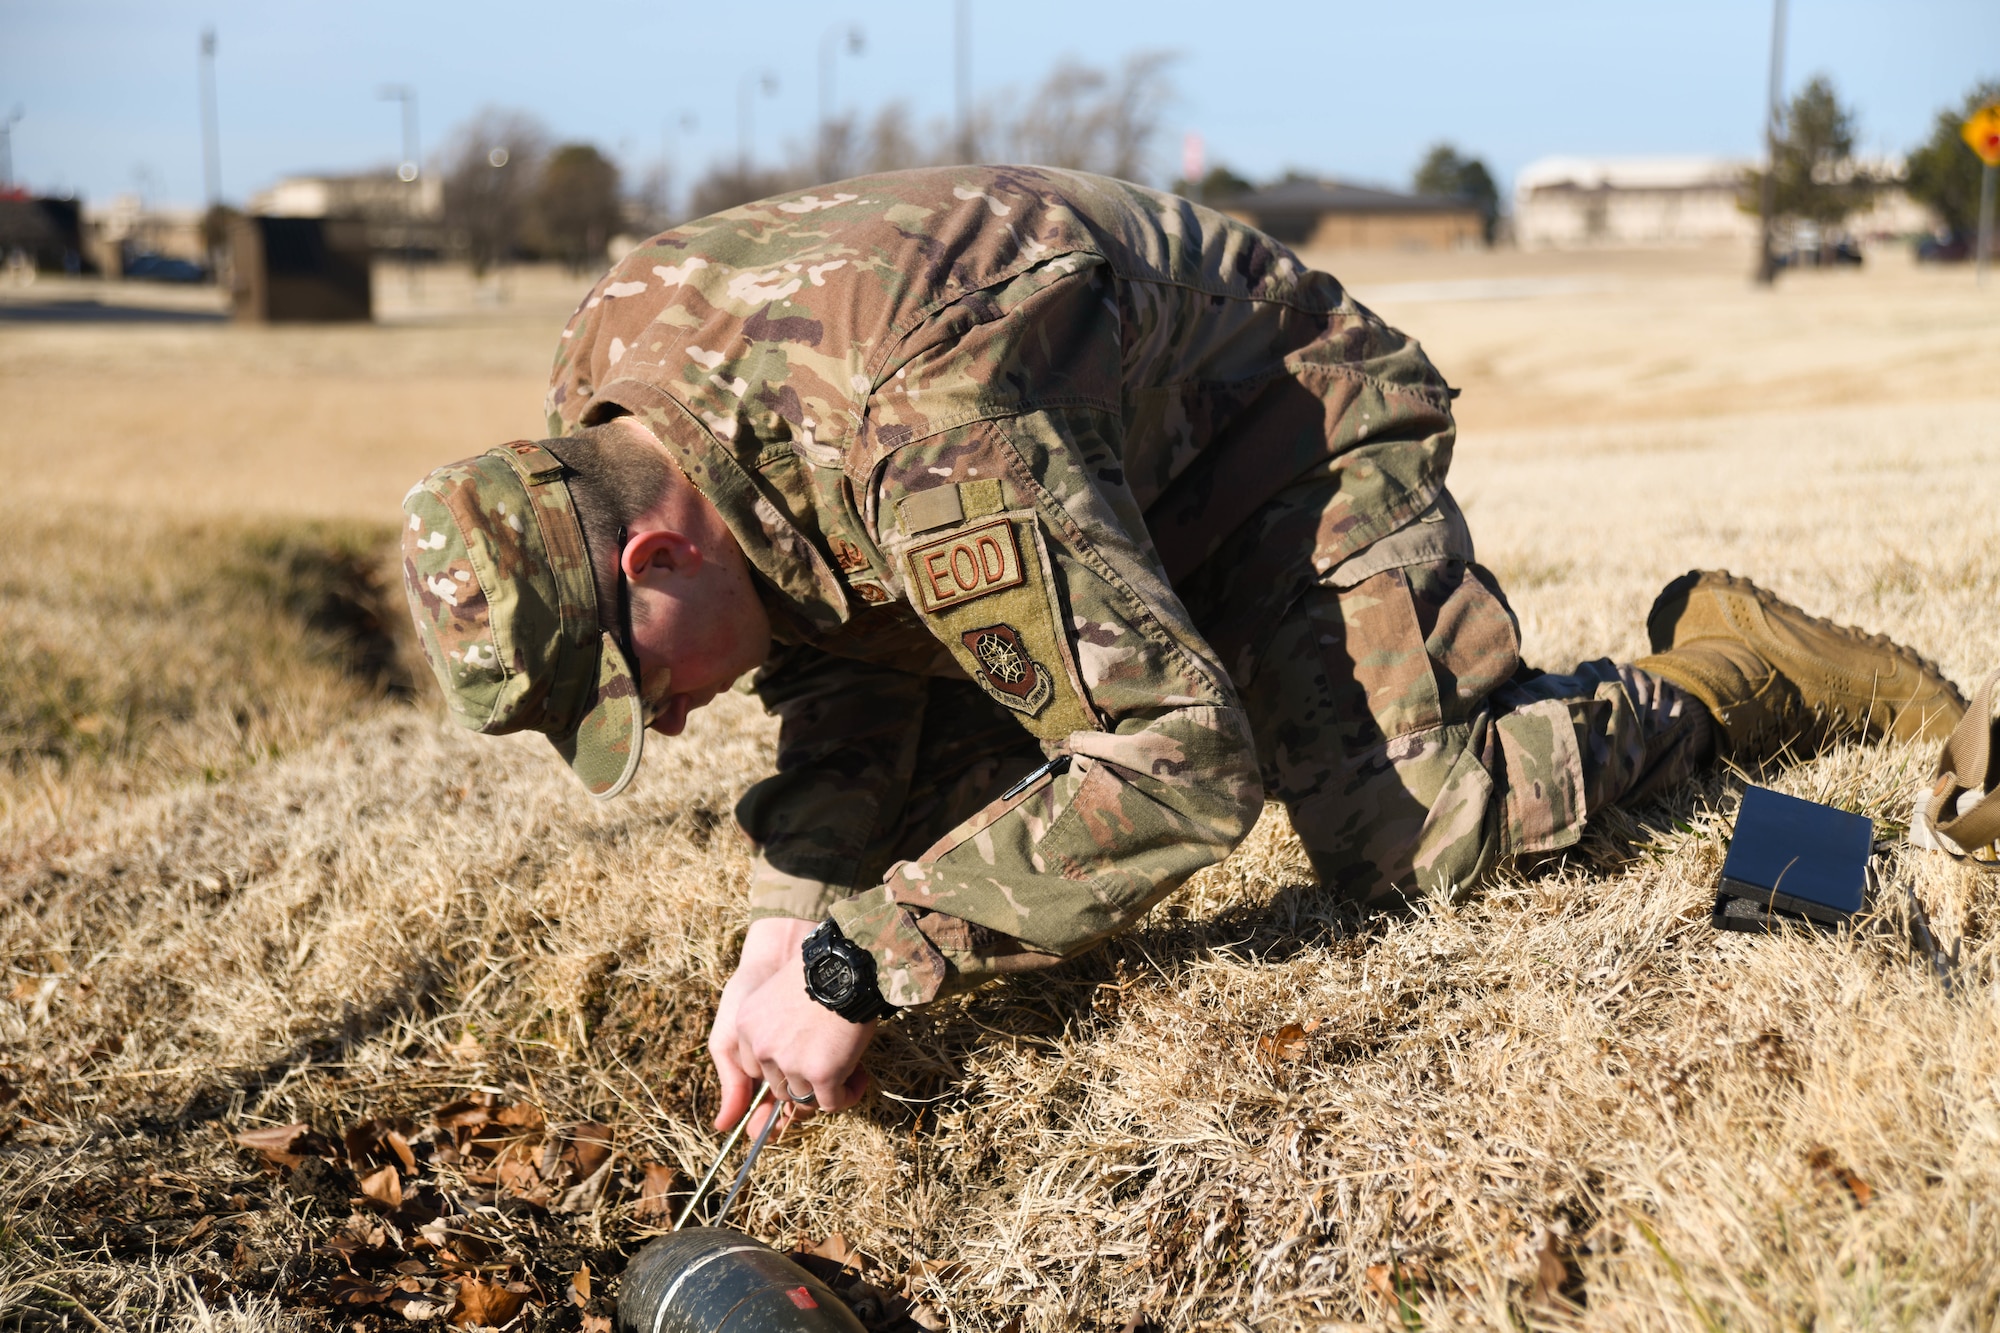 Staff Sgt. Kaanen Brabbs, 22nd Civil Engineering Squadron explosive ordnance technician, measures an unidentified explosive ordnance during upgrade training Jan. 9, 2020, at McConnell Air Force Base, Kansas.  McConnell’s EOD flight is responsible for providing rapid response capabilities to nine core mission areas. (U.S. Air Force photo by Airman 1st Class Nilsa E. Garcia)